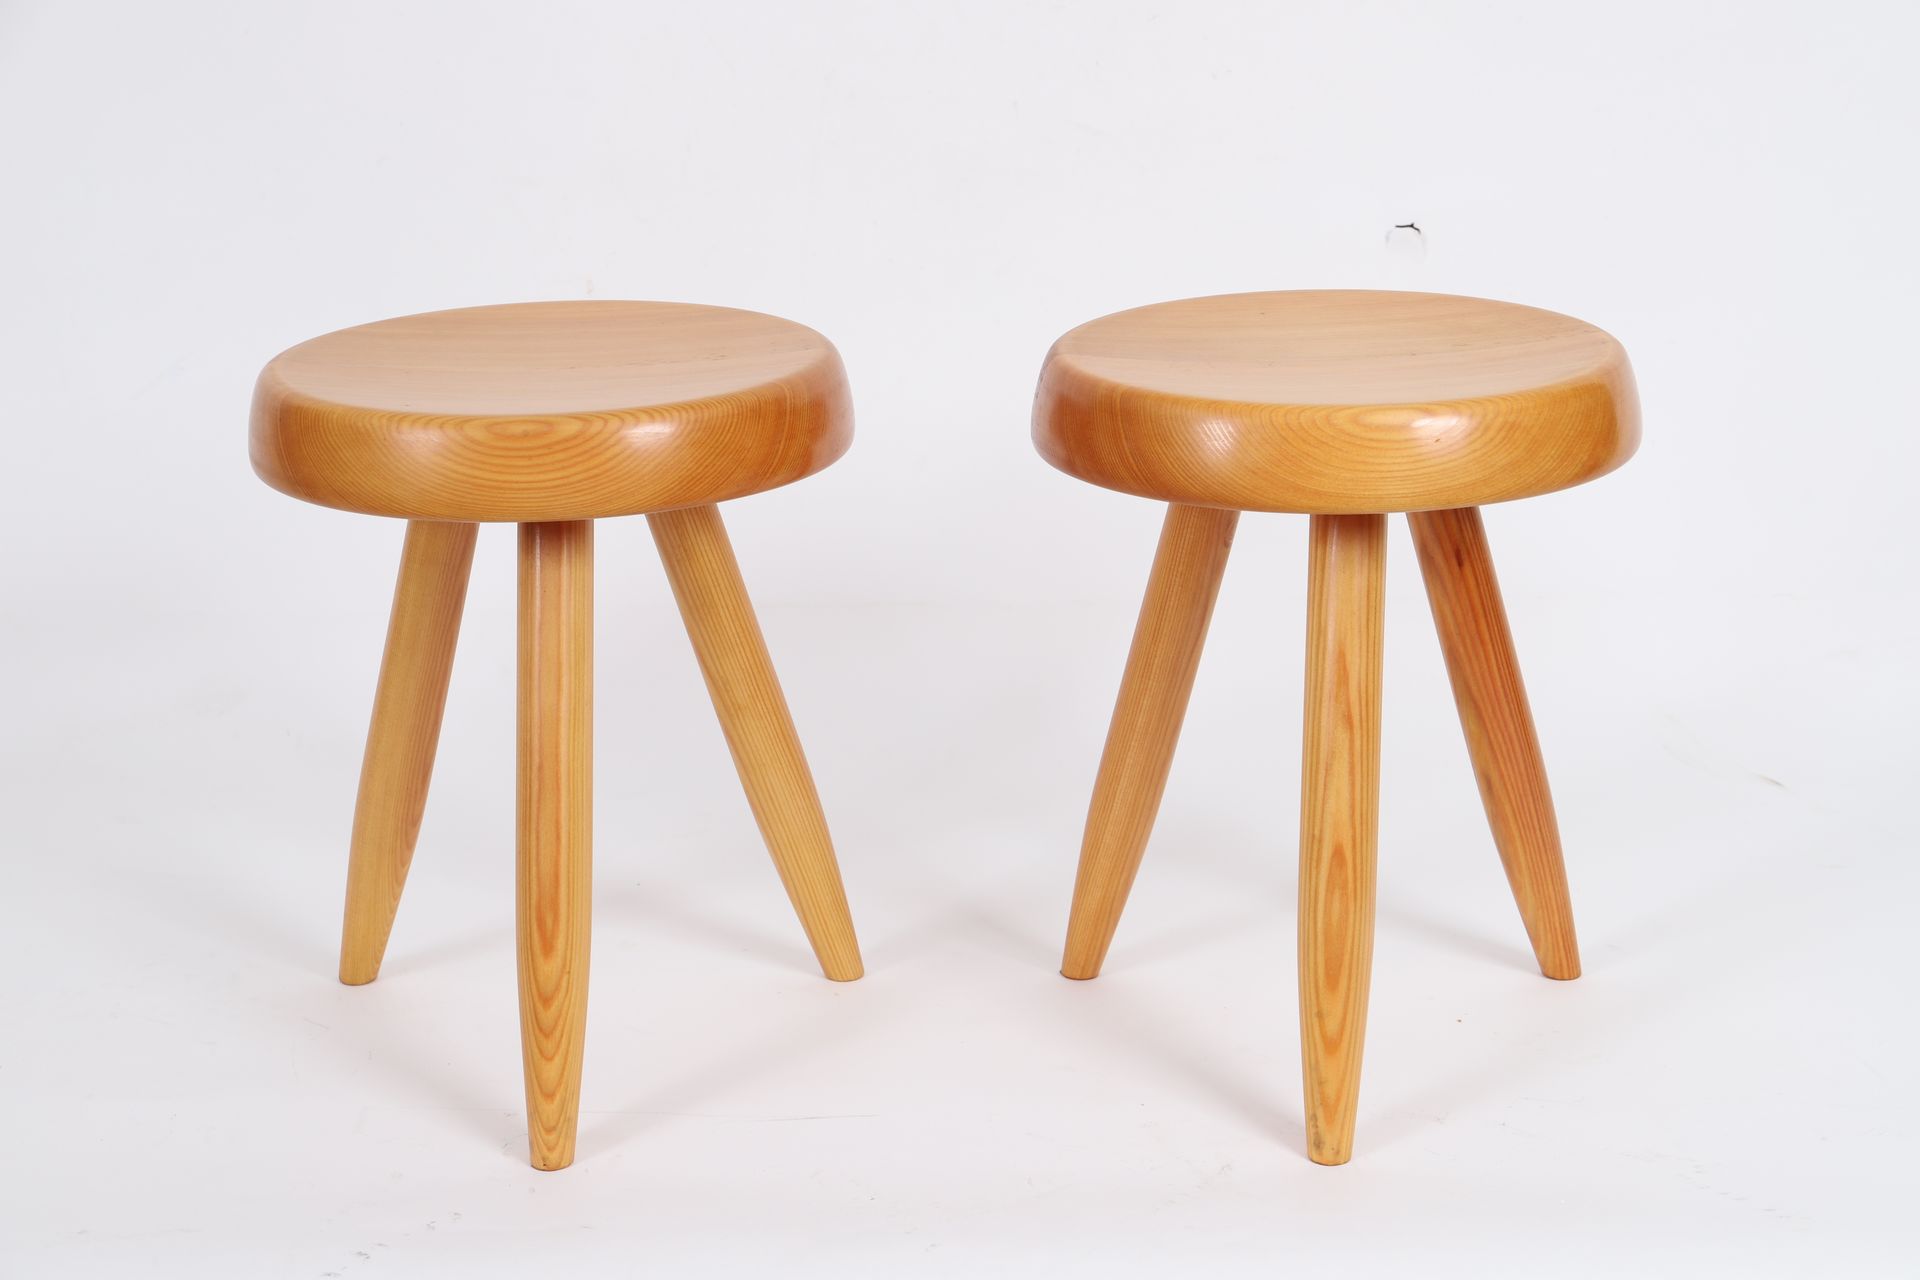 Null Stools in the style of Charlotte Perriand (1903-1999) 
French architect and&hellip;